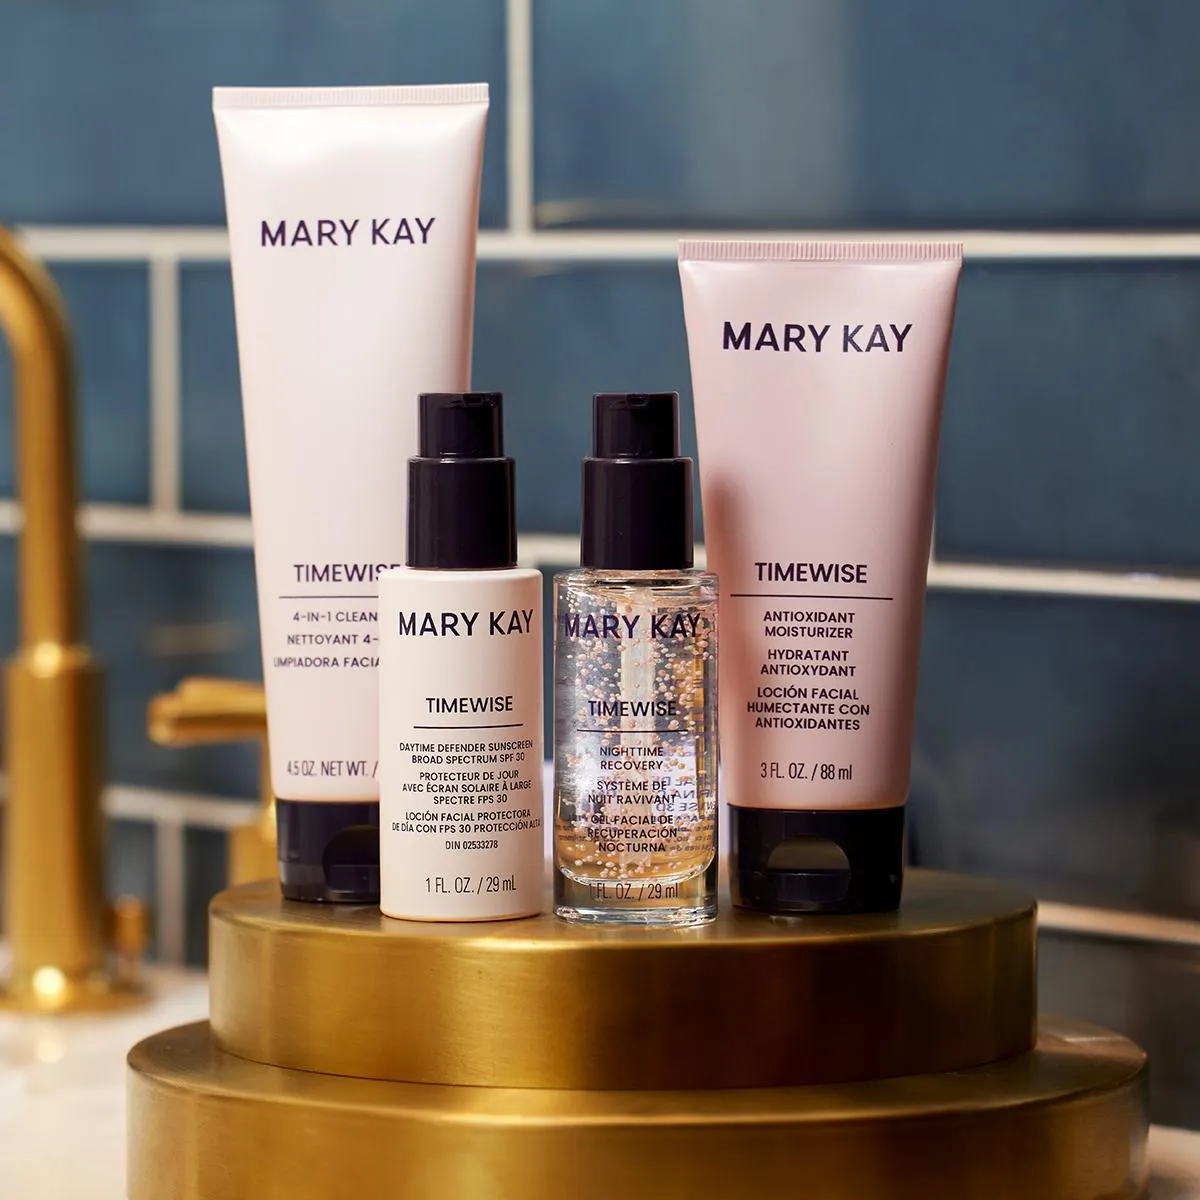 Mary Kay TImewise set, four pink bottles with black tops. They are sitting on a gold stand in a black and white bathroom.